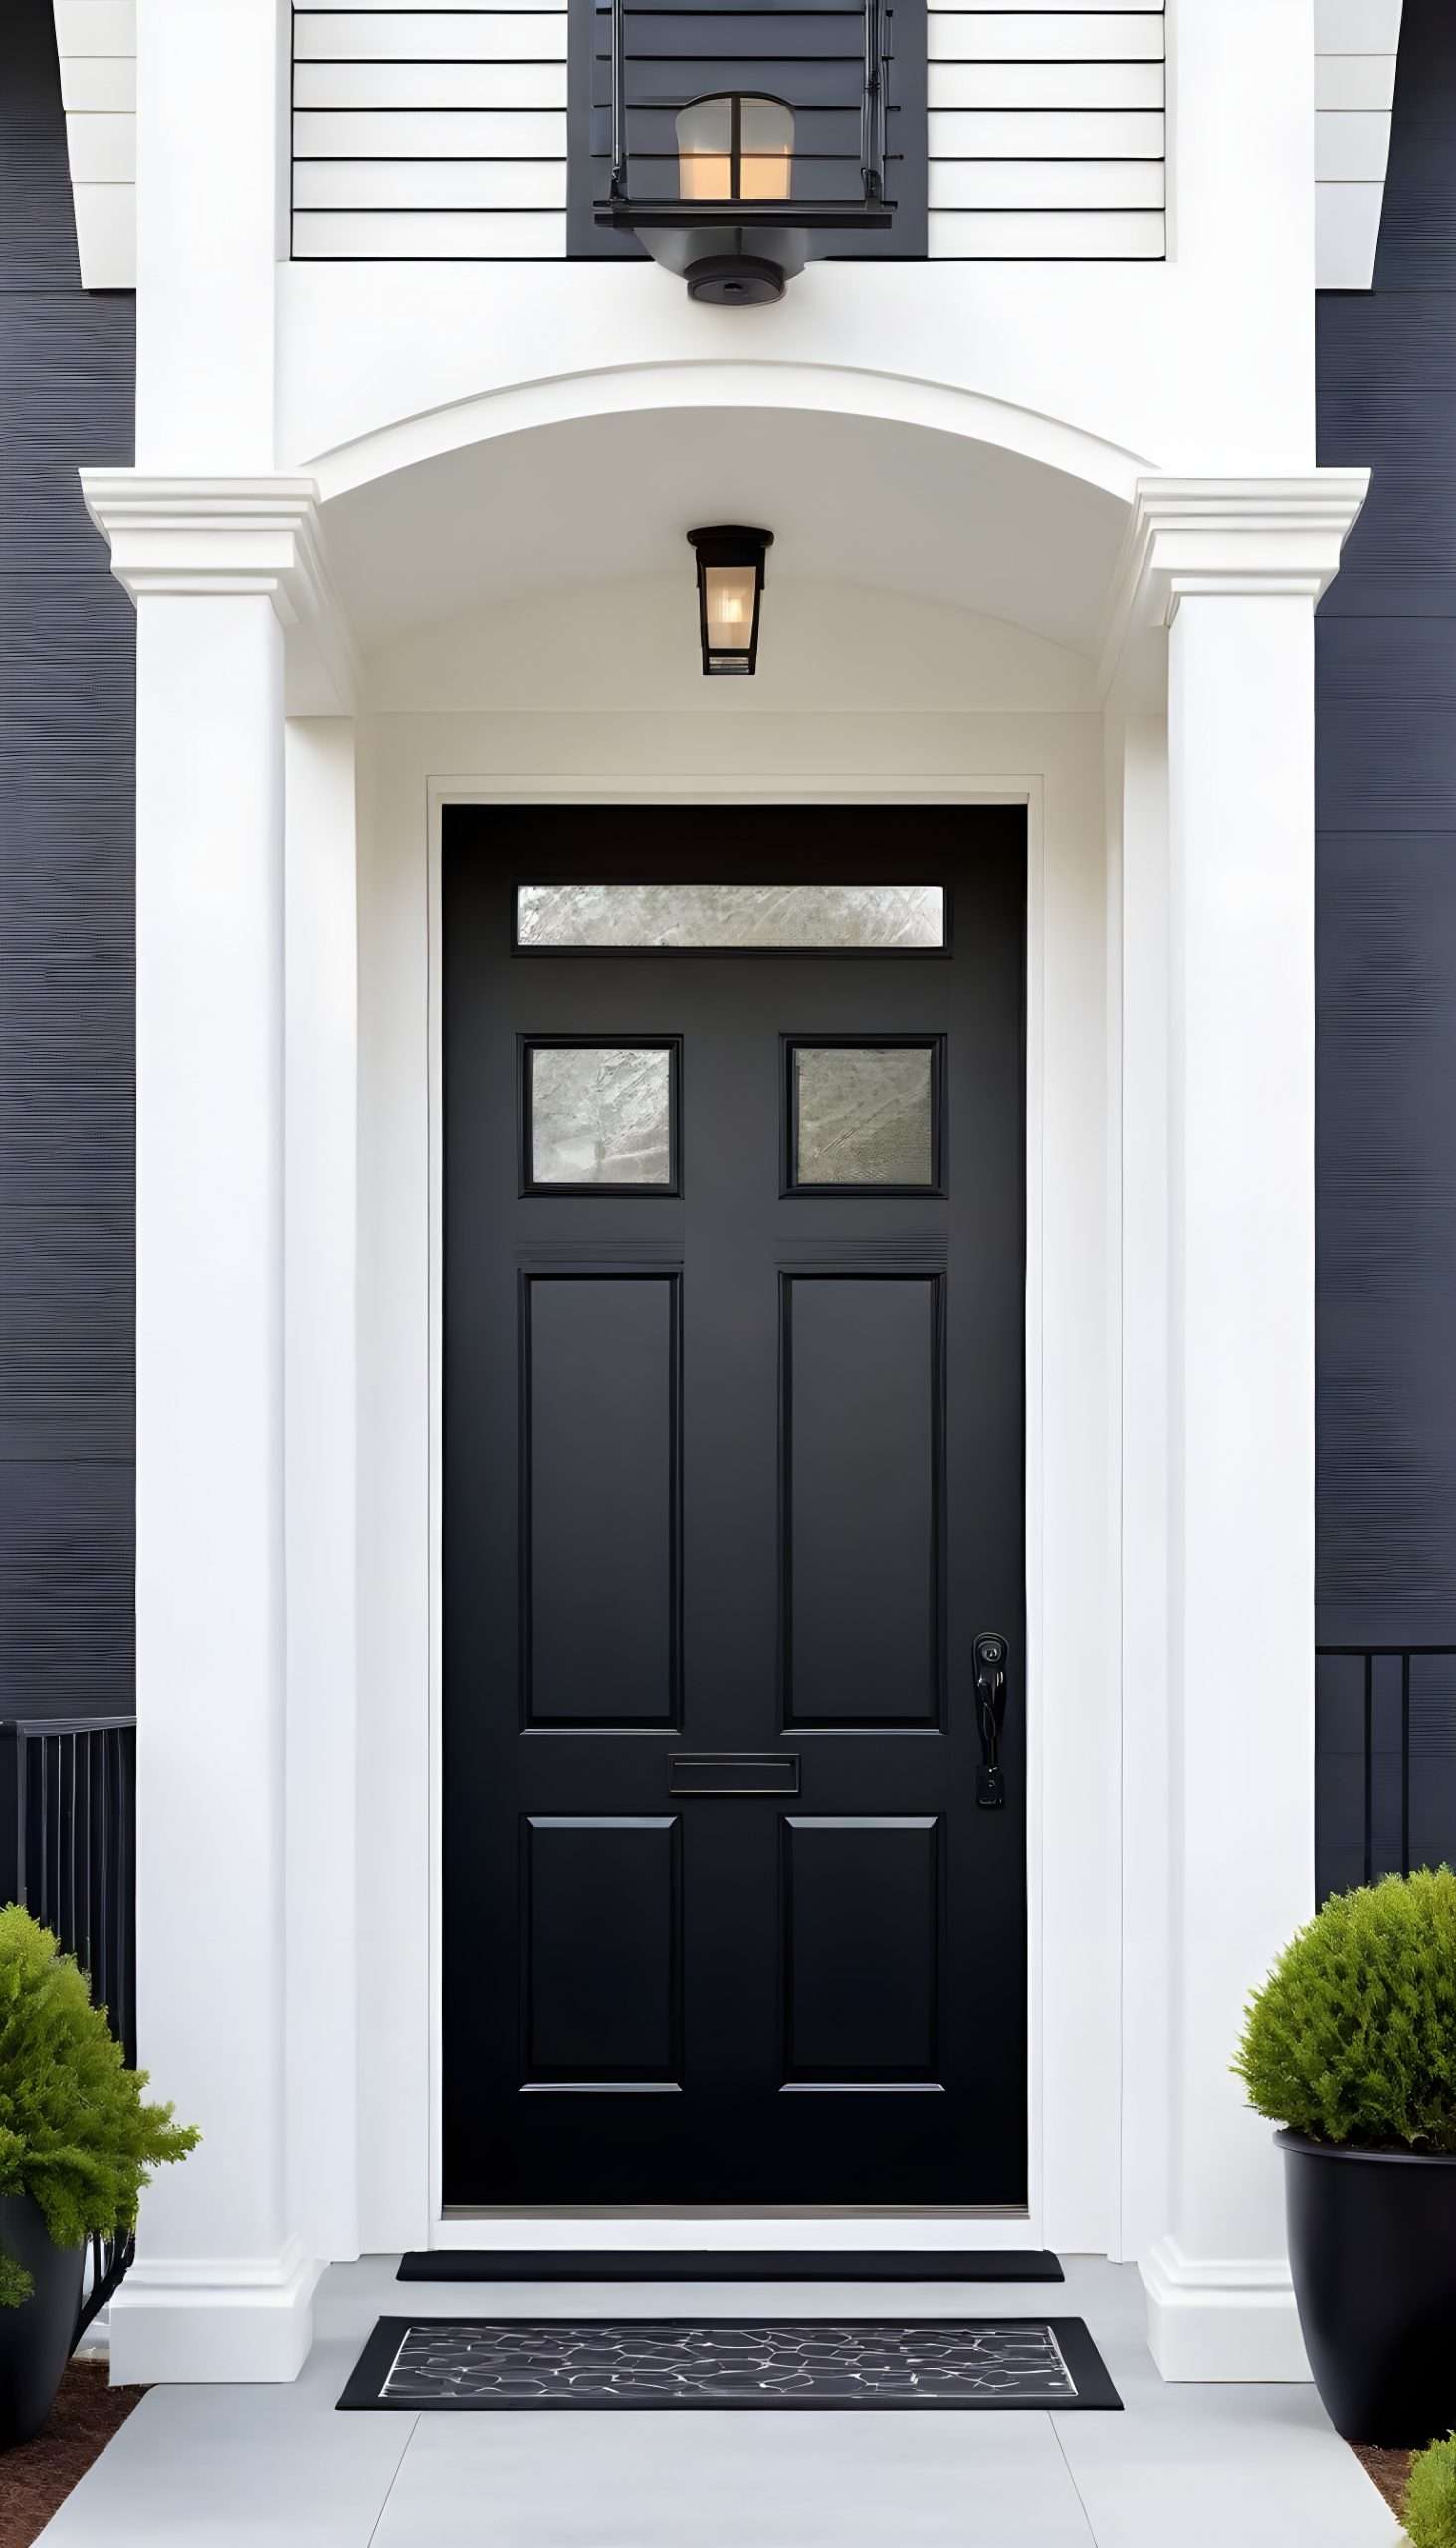 Timeless-Sophistication-with-a-Monochromatic-Theme--Wield-the-power-of-understated-elegance-with-a-monochromatic-front-entryway--From-the-siding-and-front-door-to-the-trim-and-light-fixtures--stick-to (1)